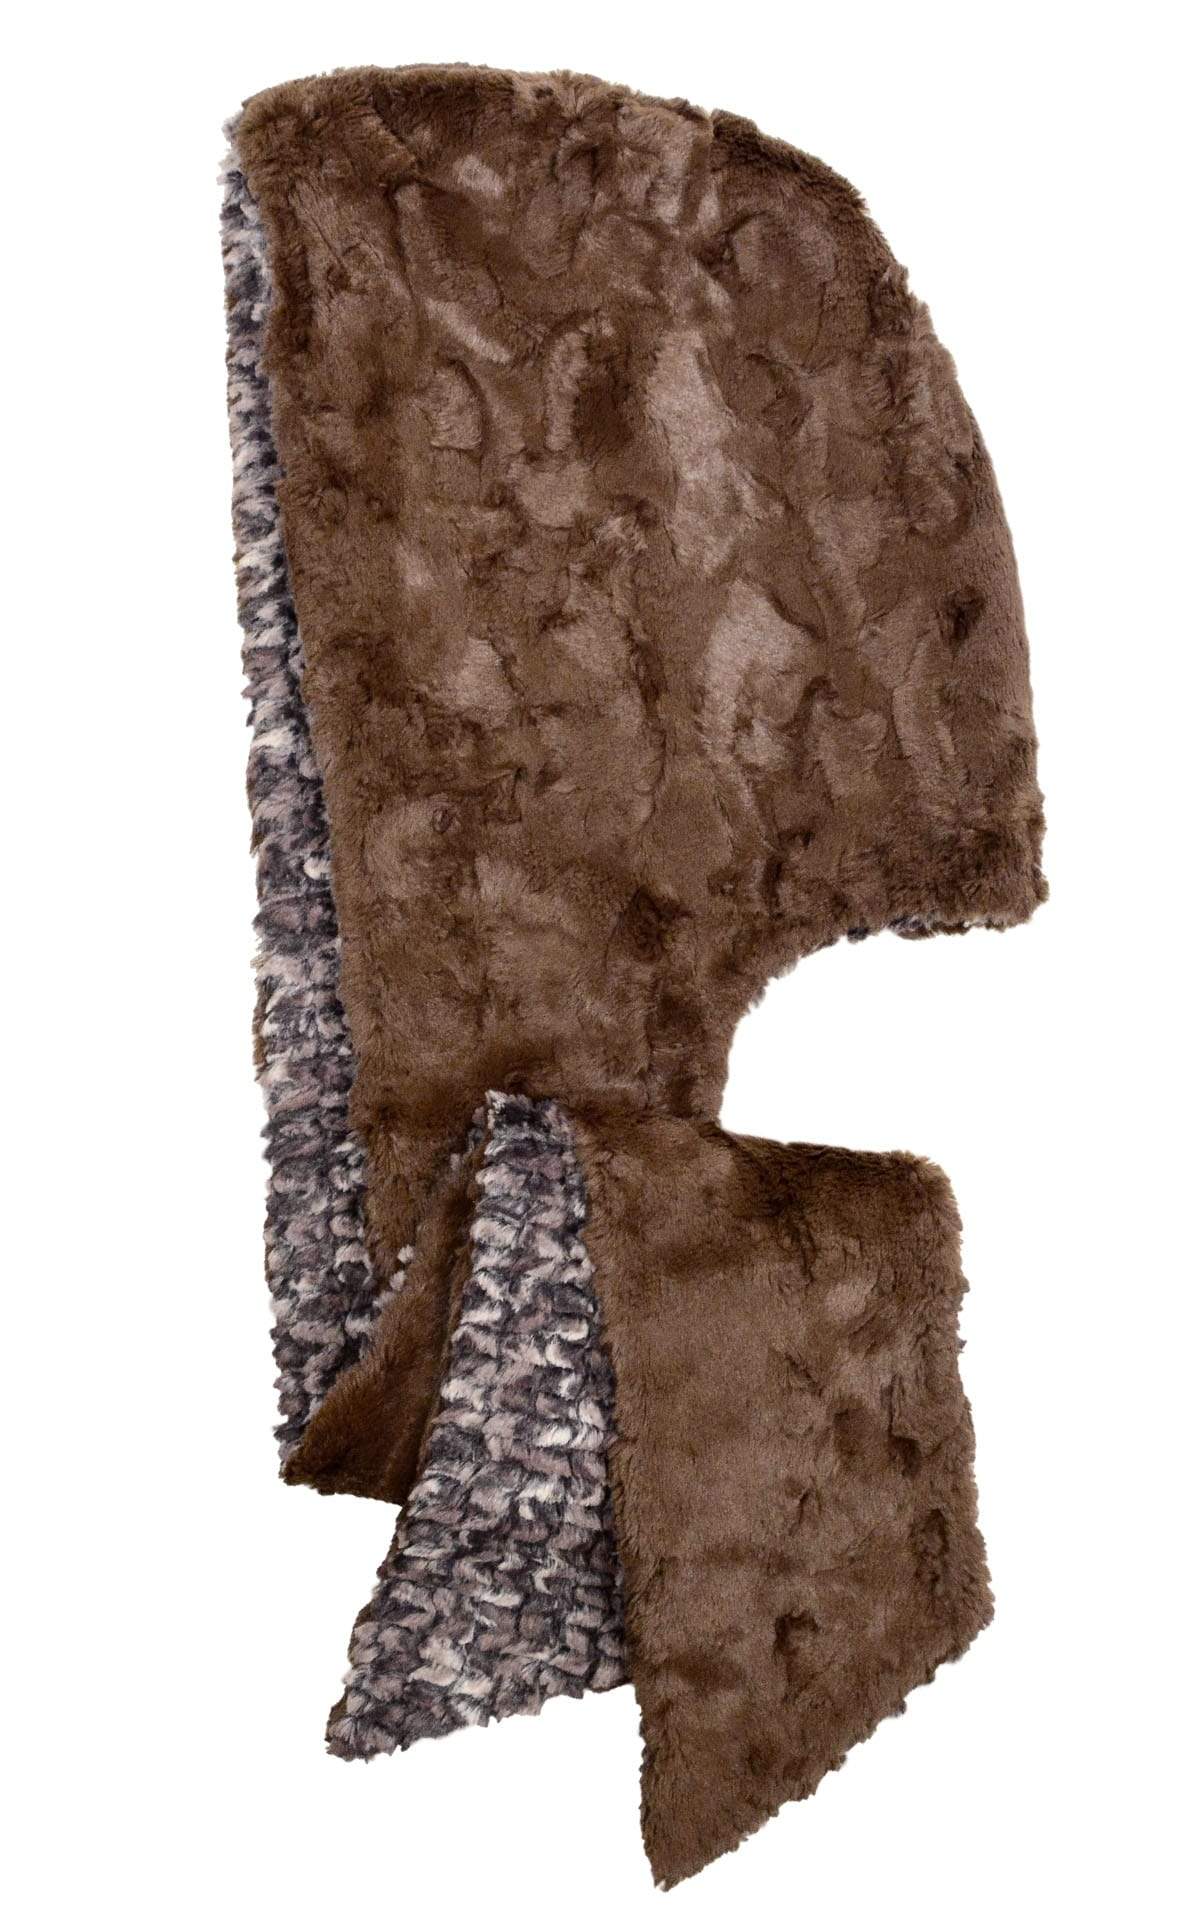 Unisex Two-Tone Hooded Scarf | Calico print of Brown, Black, and Creams  with Cuddly Fur in Chocolate Faux Fur, Shown in reverse | Handmade in Seattle WA | Pandemonium Millinery